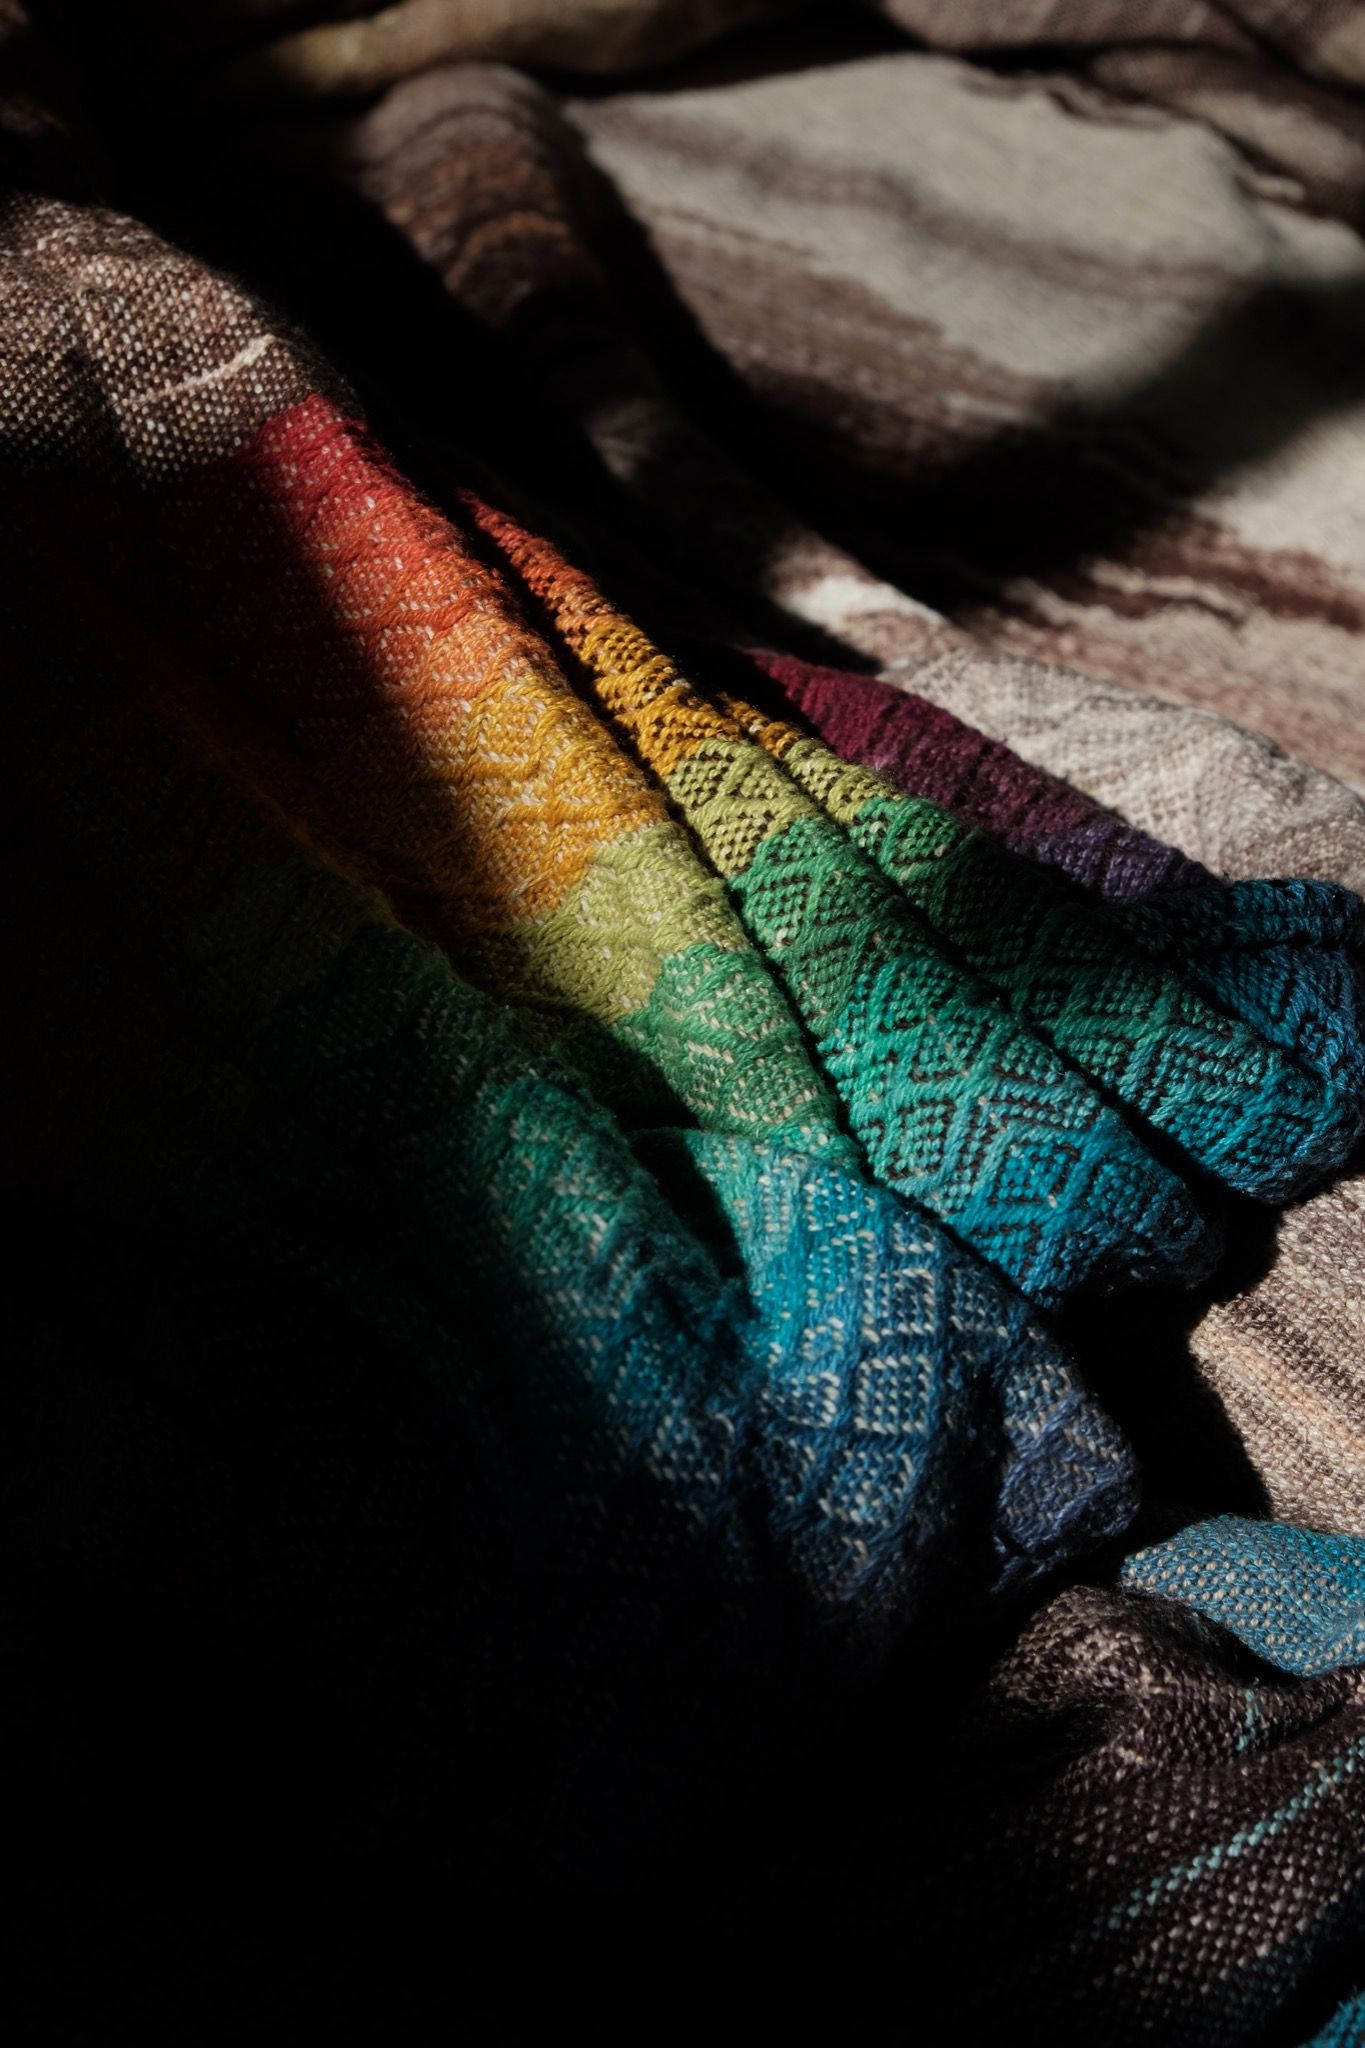 Handwoven fabric with a diamond pattern in brown, cream, white and rainbow colors